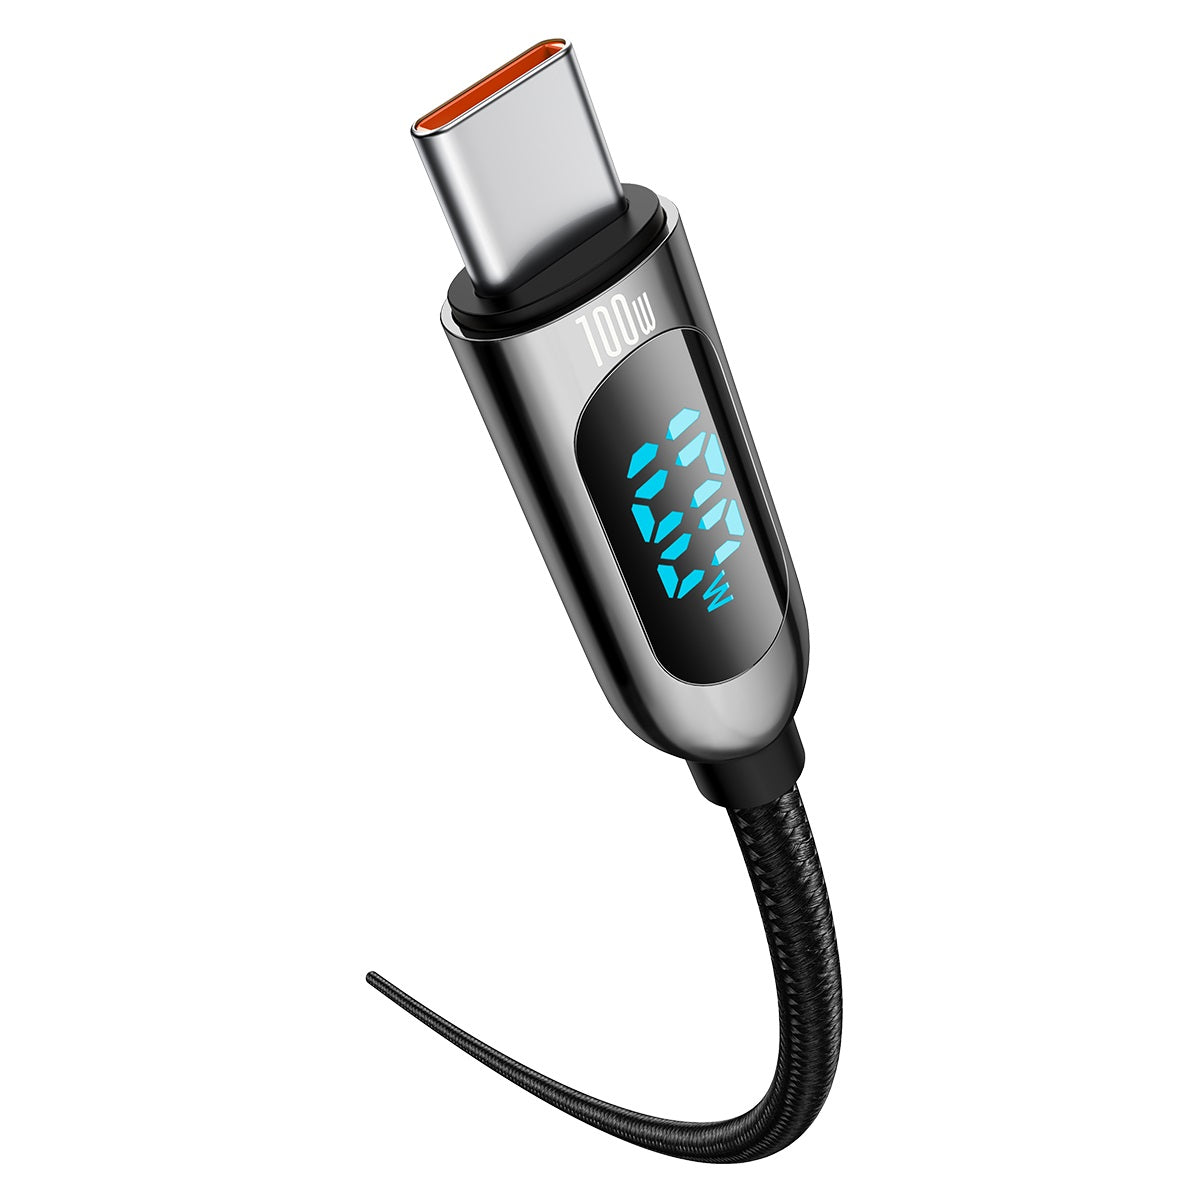 Baseus Display Fast Charging Data Cable 1m Price in Pakistan